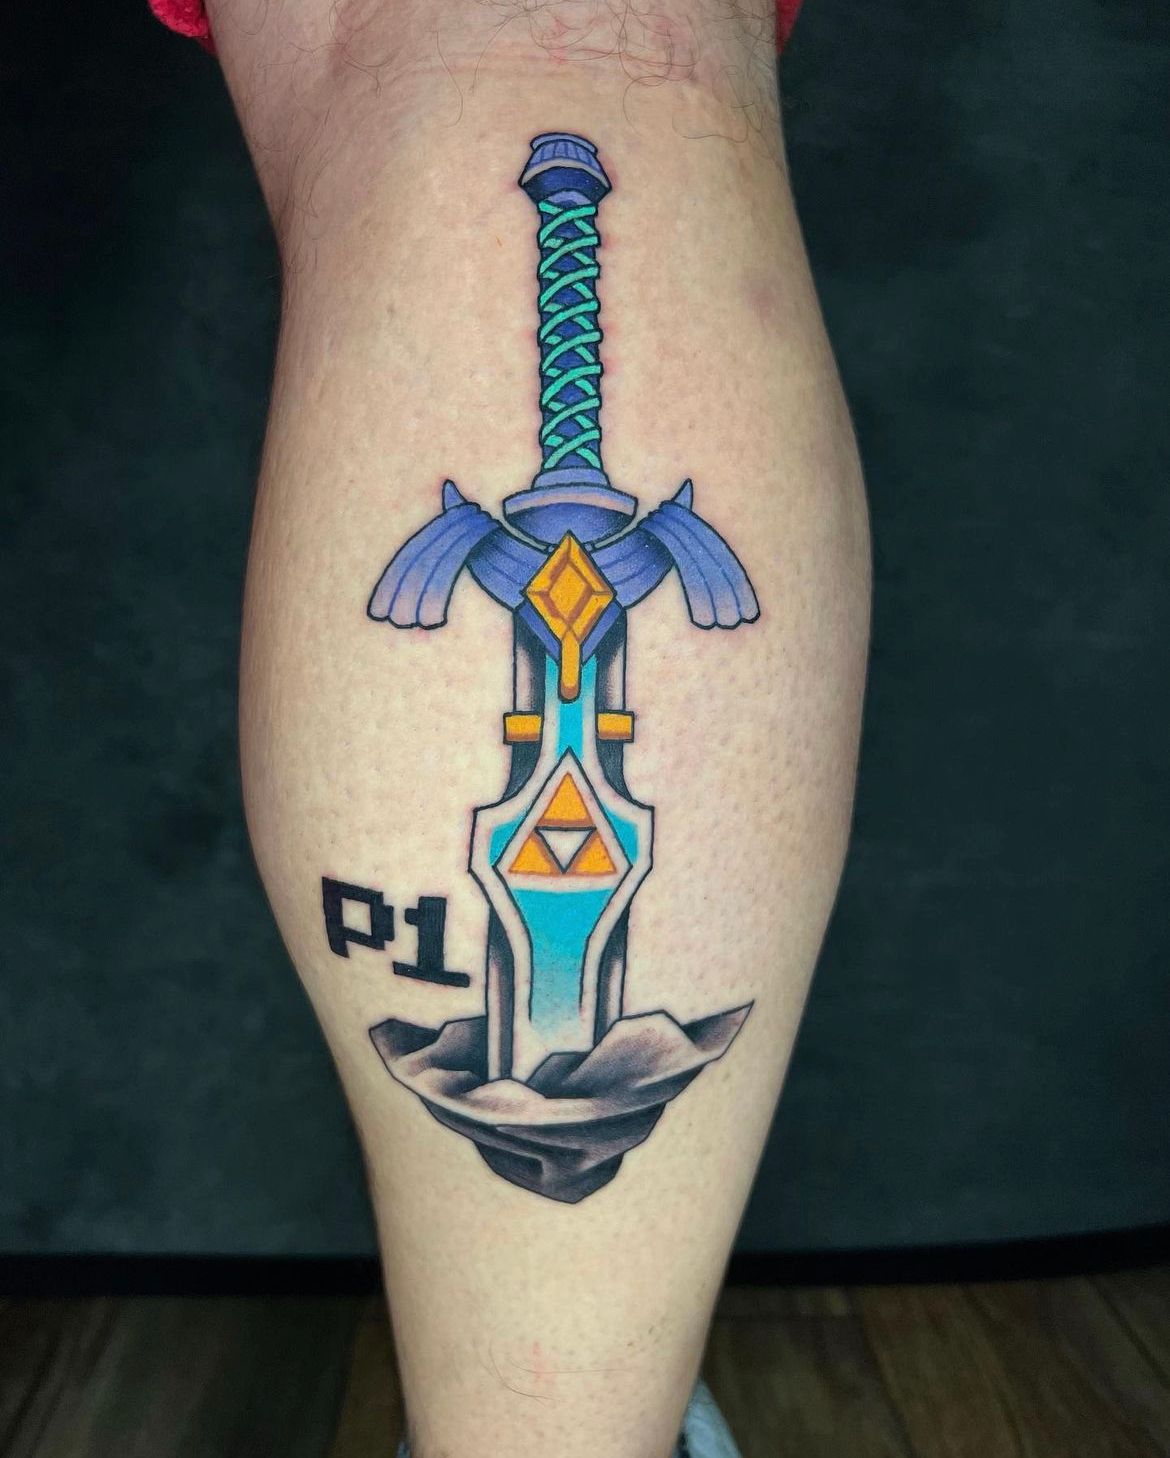 Player one player two tattoos with pixelated heart  Pixel heart tattoo  Retro tattoos Minecraft tattoo